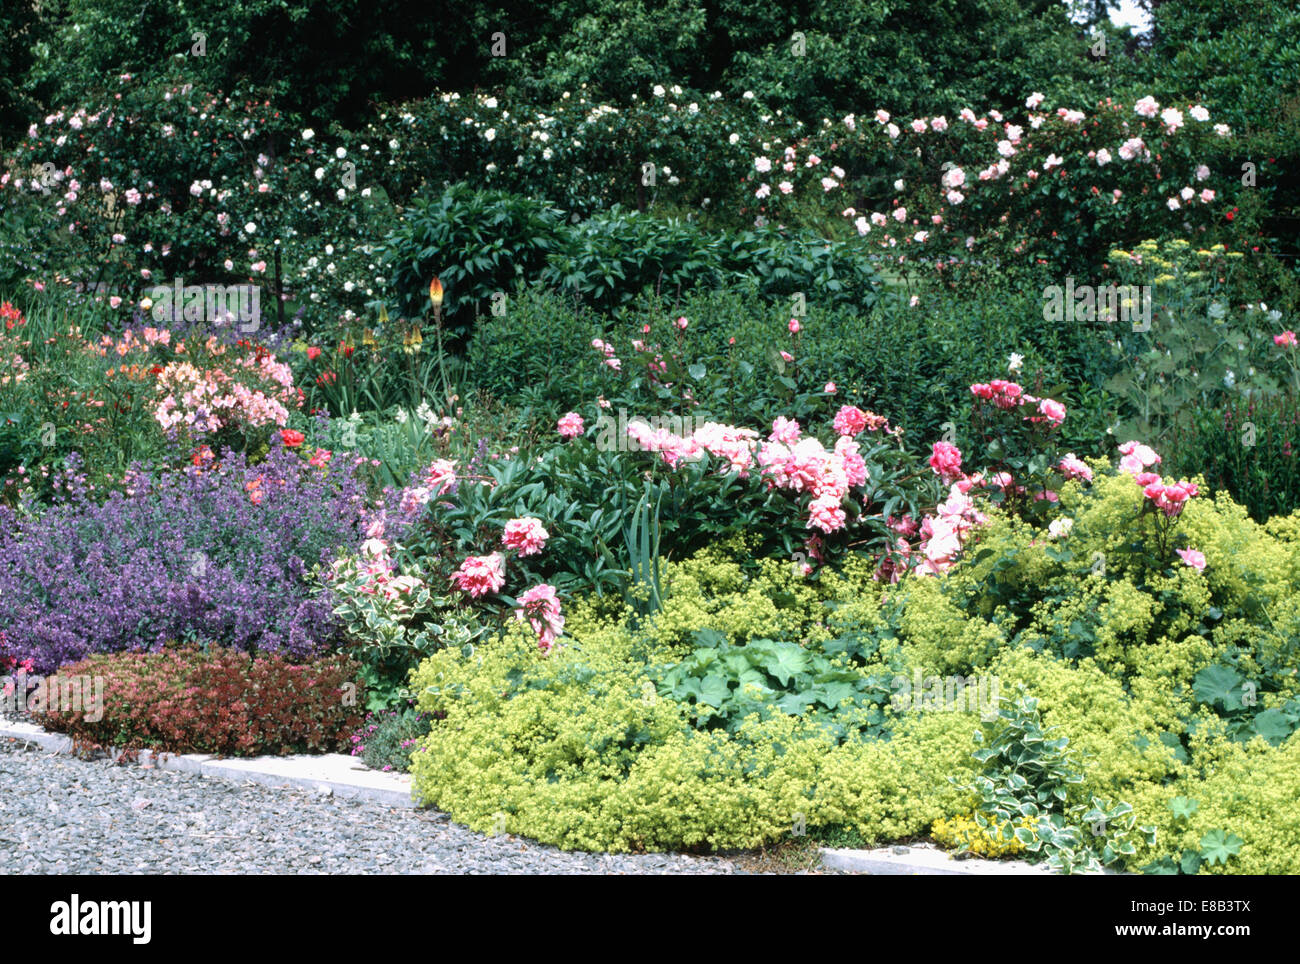 Alchemilla Mollis' and nepeta with pink paeonies in garden border with a rose hedge in the background Stock Photo